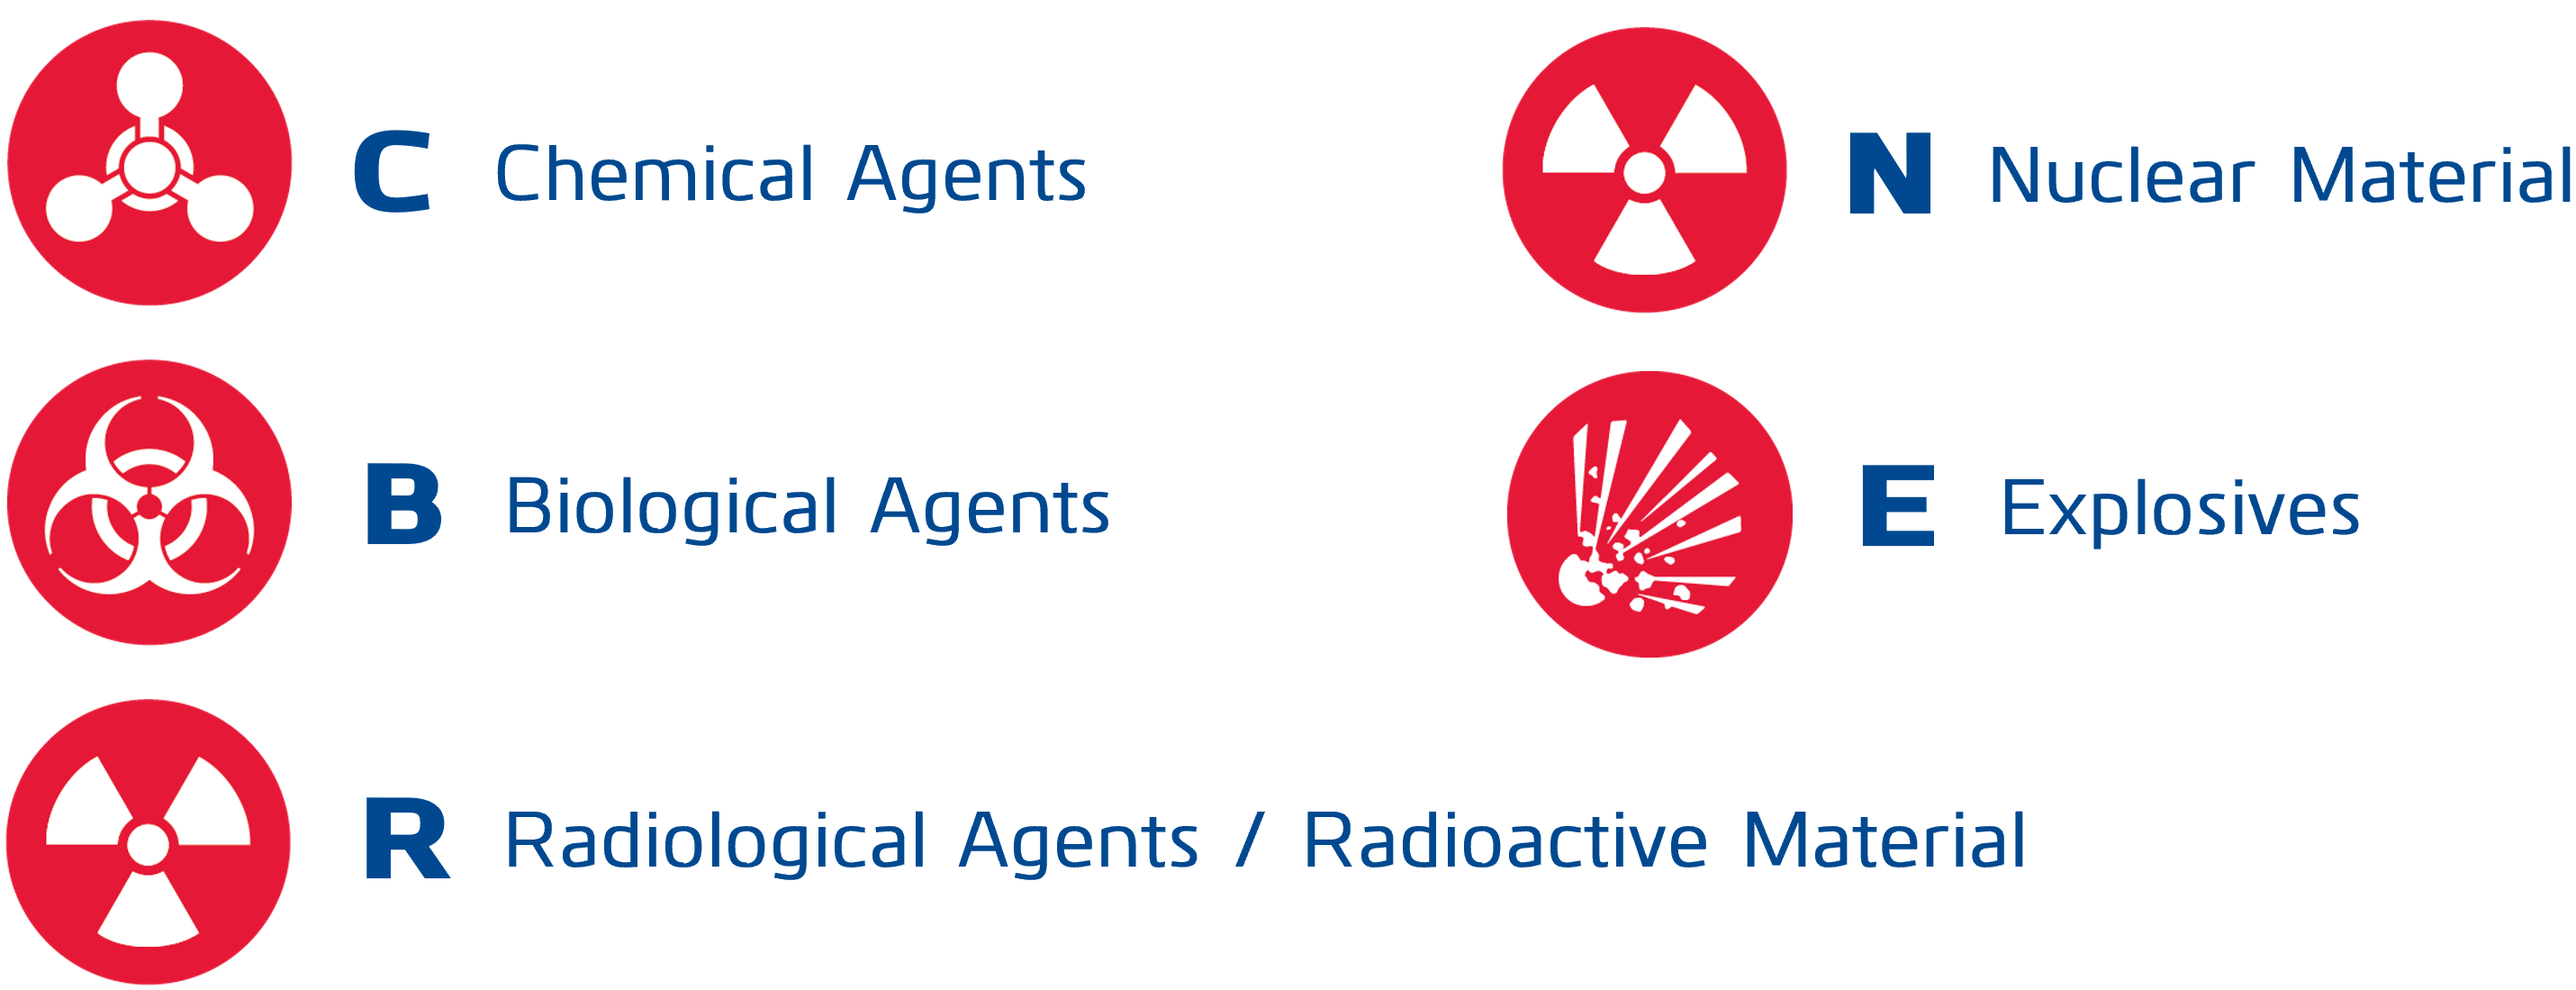 CBRNE Risks and Threats - Webinar page 01